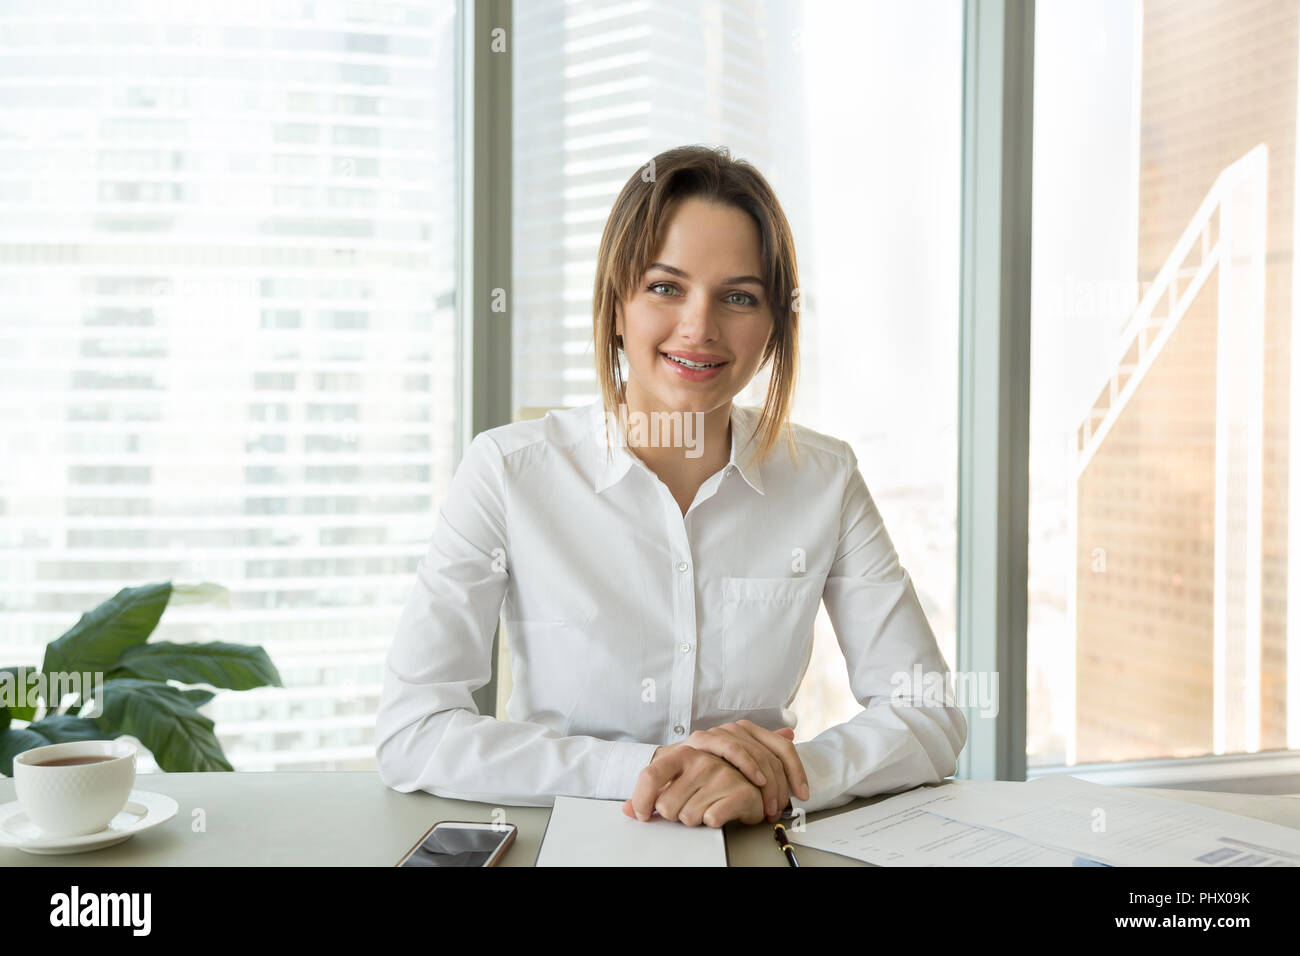 Successful businesswoman talking at camera giving interview or r Stock Photo